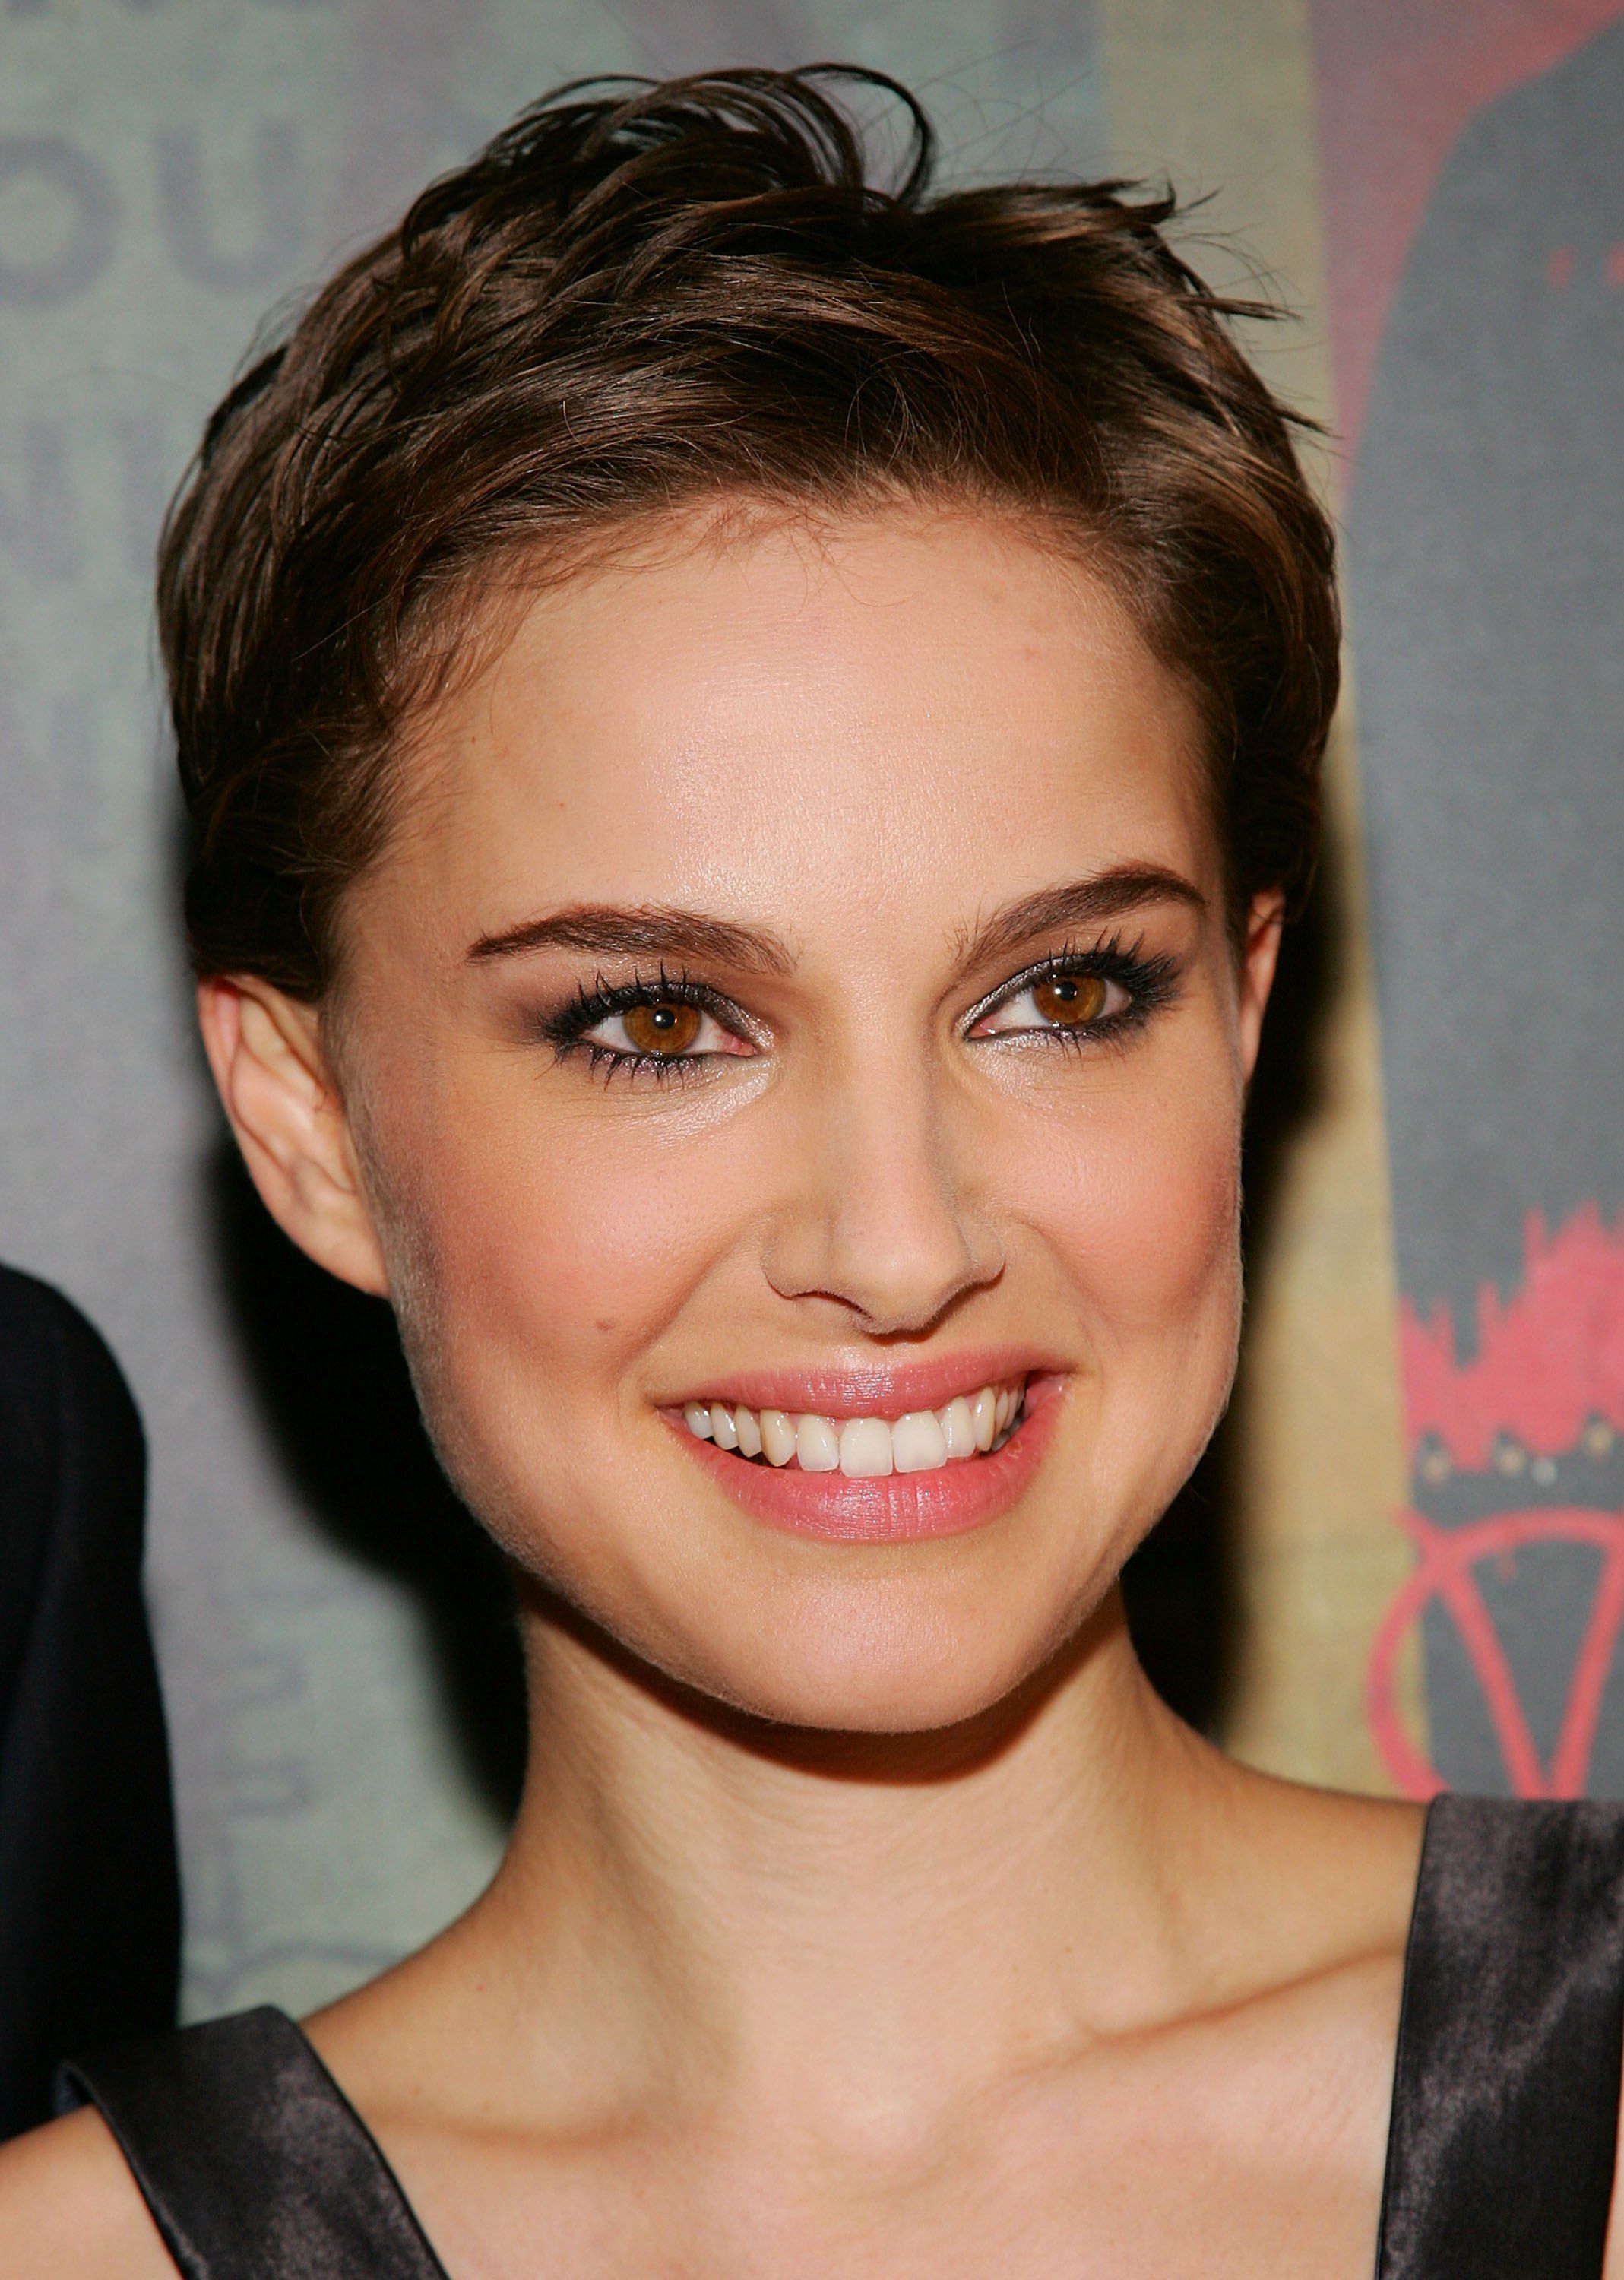 Natalie Portman at the premiere of "V for Vendetta"in 2006 in New York City | Source: Getty Images